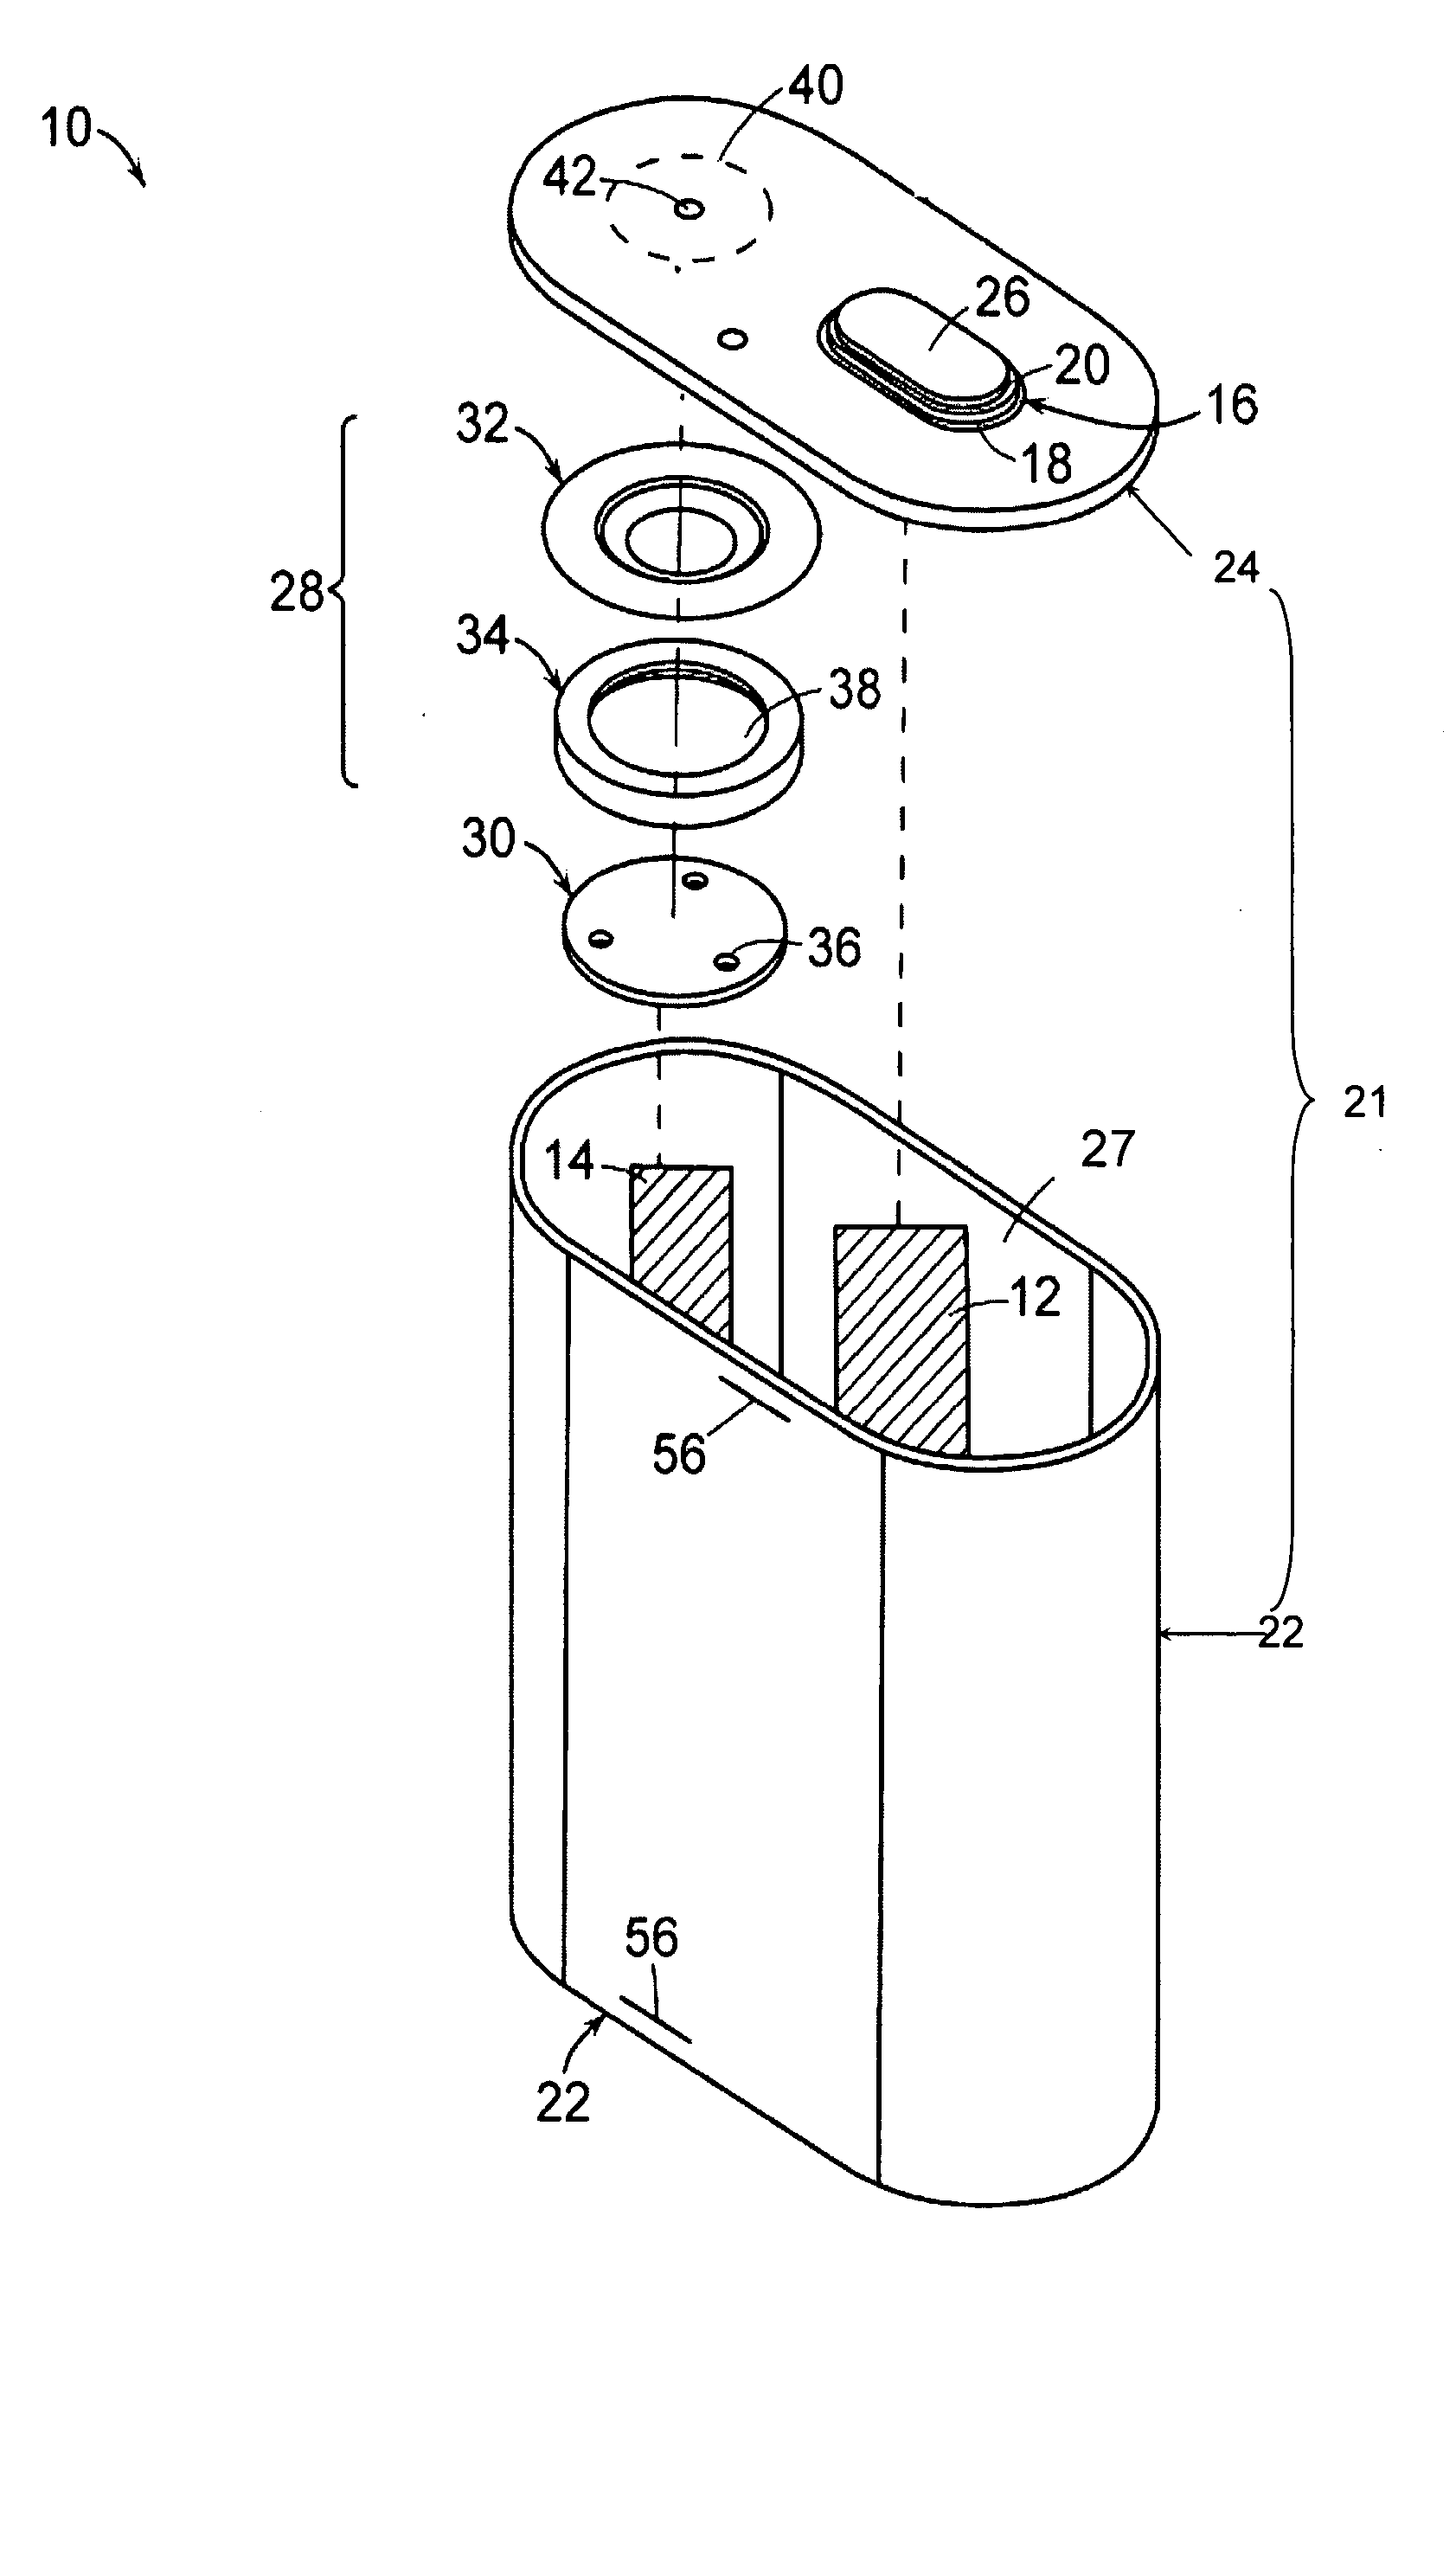 Integrated current-interrupt device for lithium-ion cells